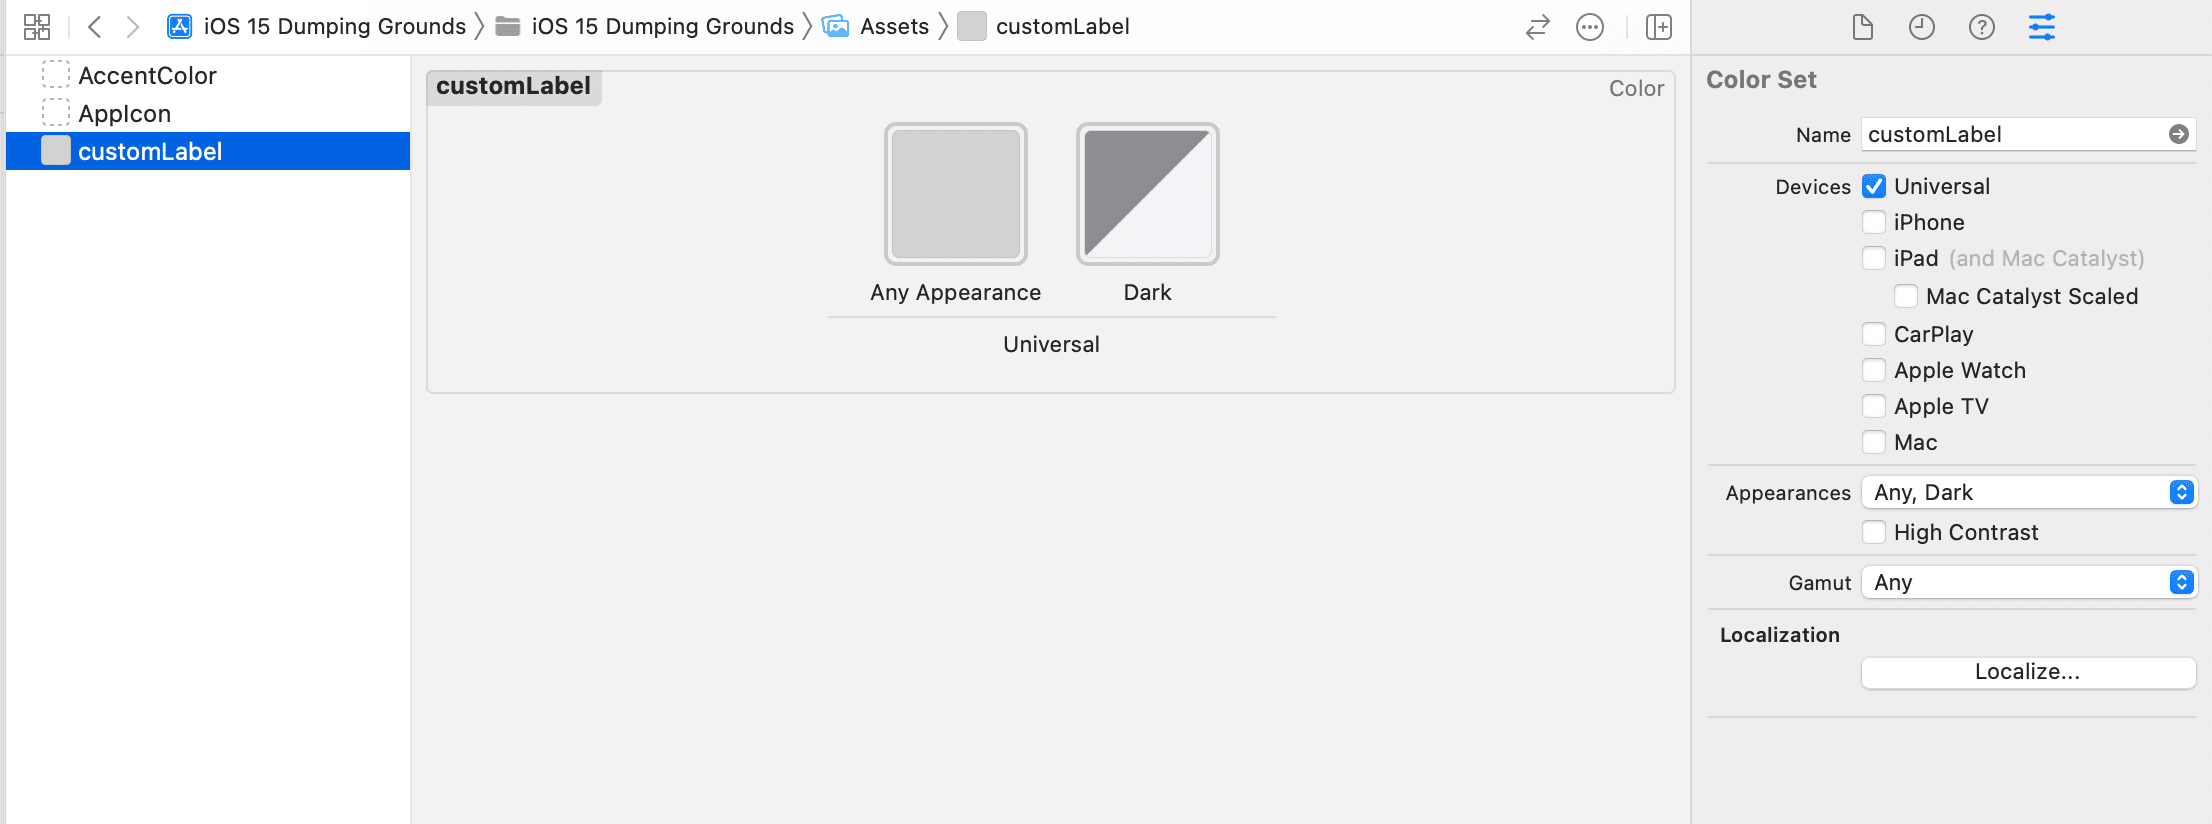 The color asset catalog in Xcode.